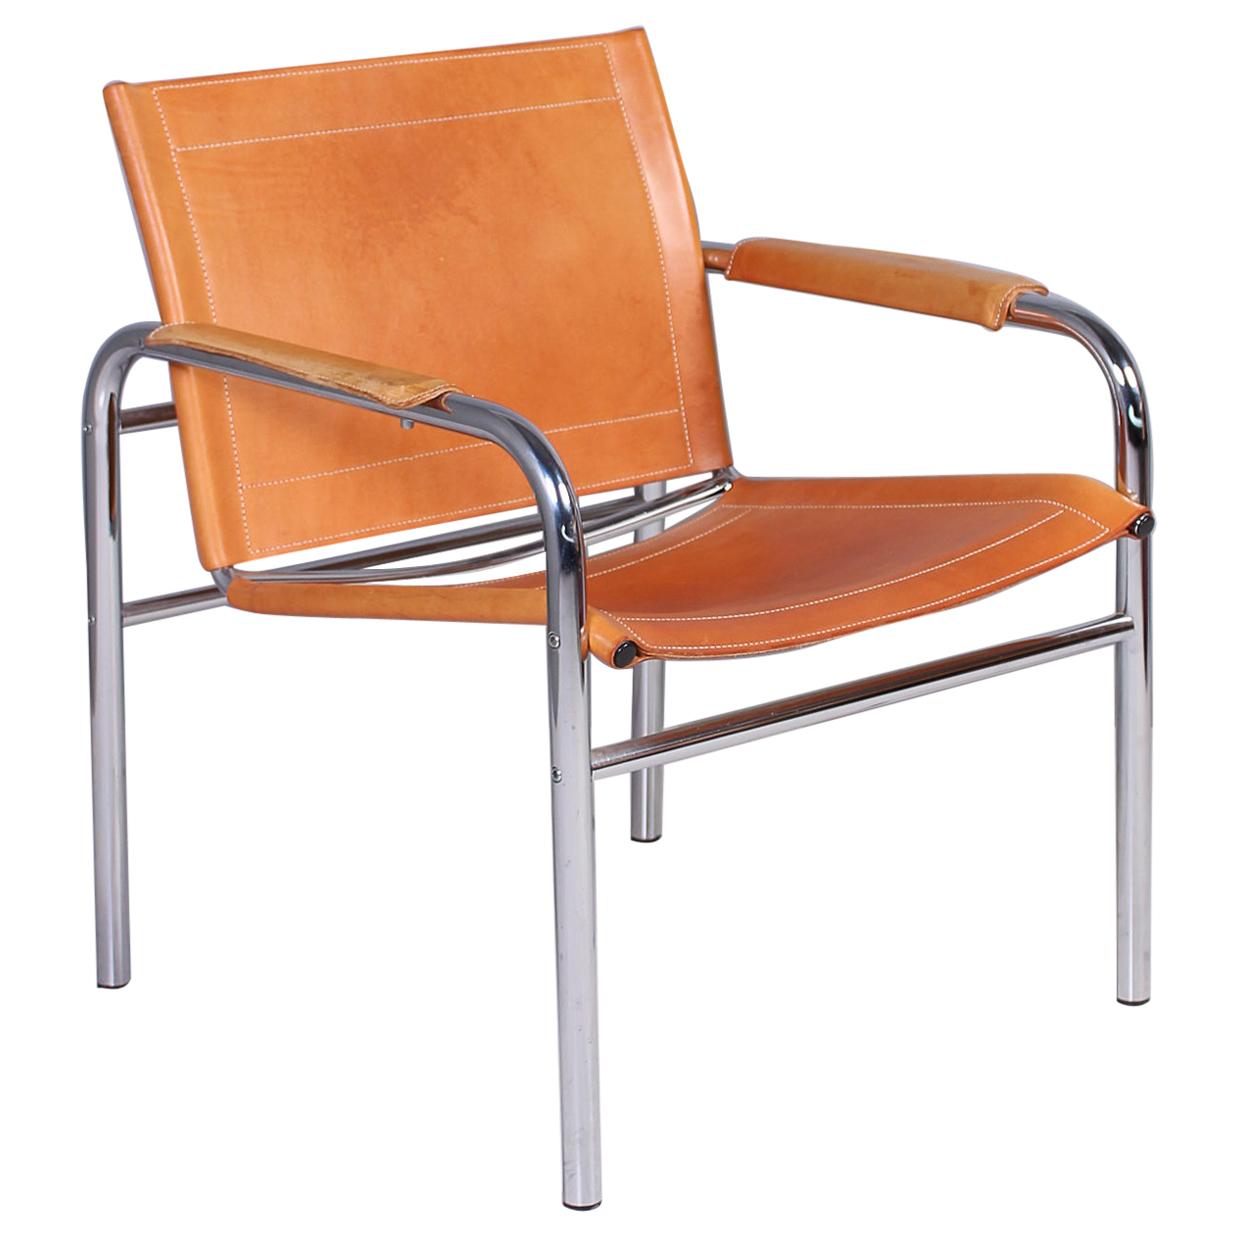 Klinte" Cognac Leather Easy Chair by Tord Björklund, 1970s at 1stDibs | klinte  stol, klinte tord björklund